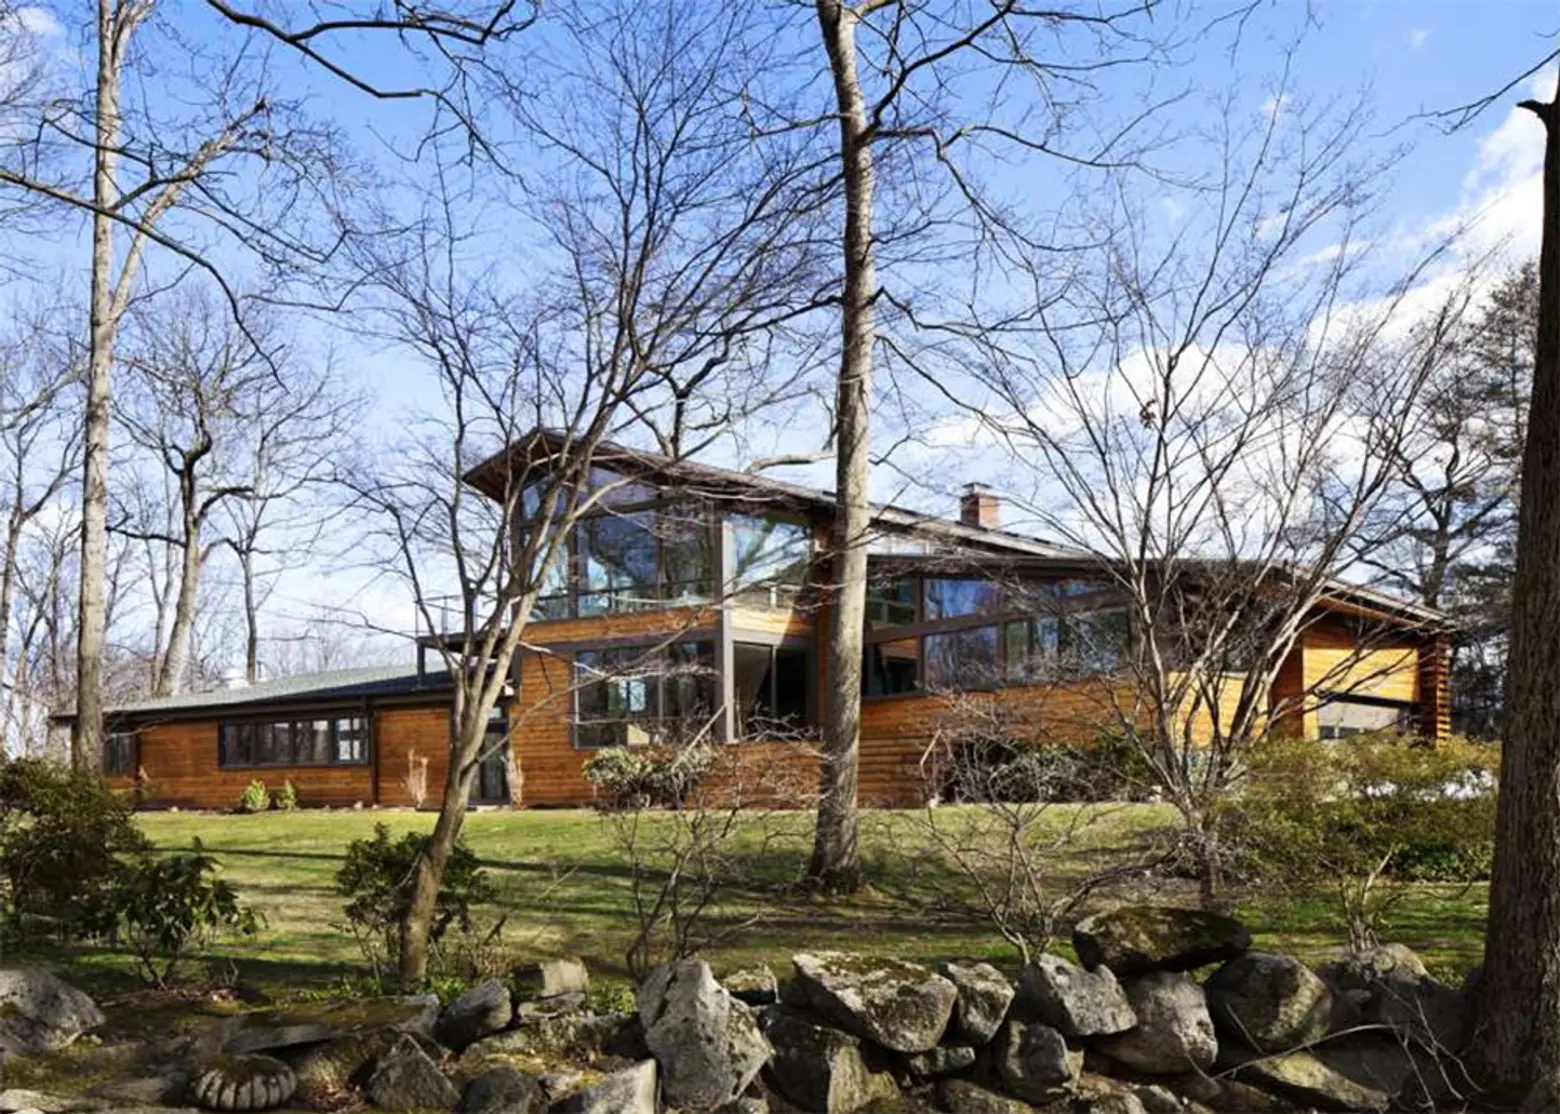 Architect Stephen Moser, treehouse-inspired home, Mamaroneck Residence, renovated ranch, 1950s ranch, Mamaroneck, O’Brien Carpentry,